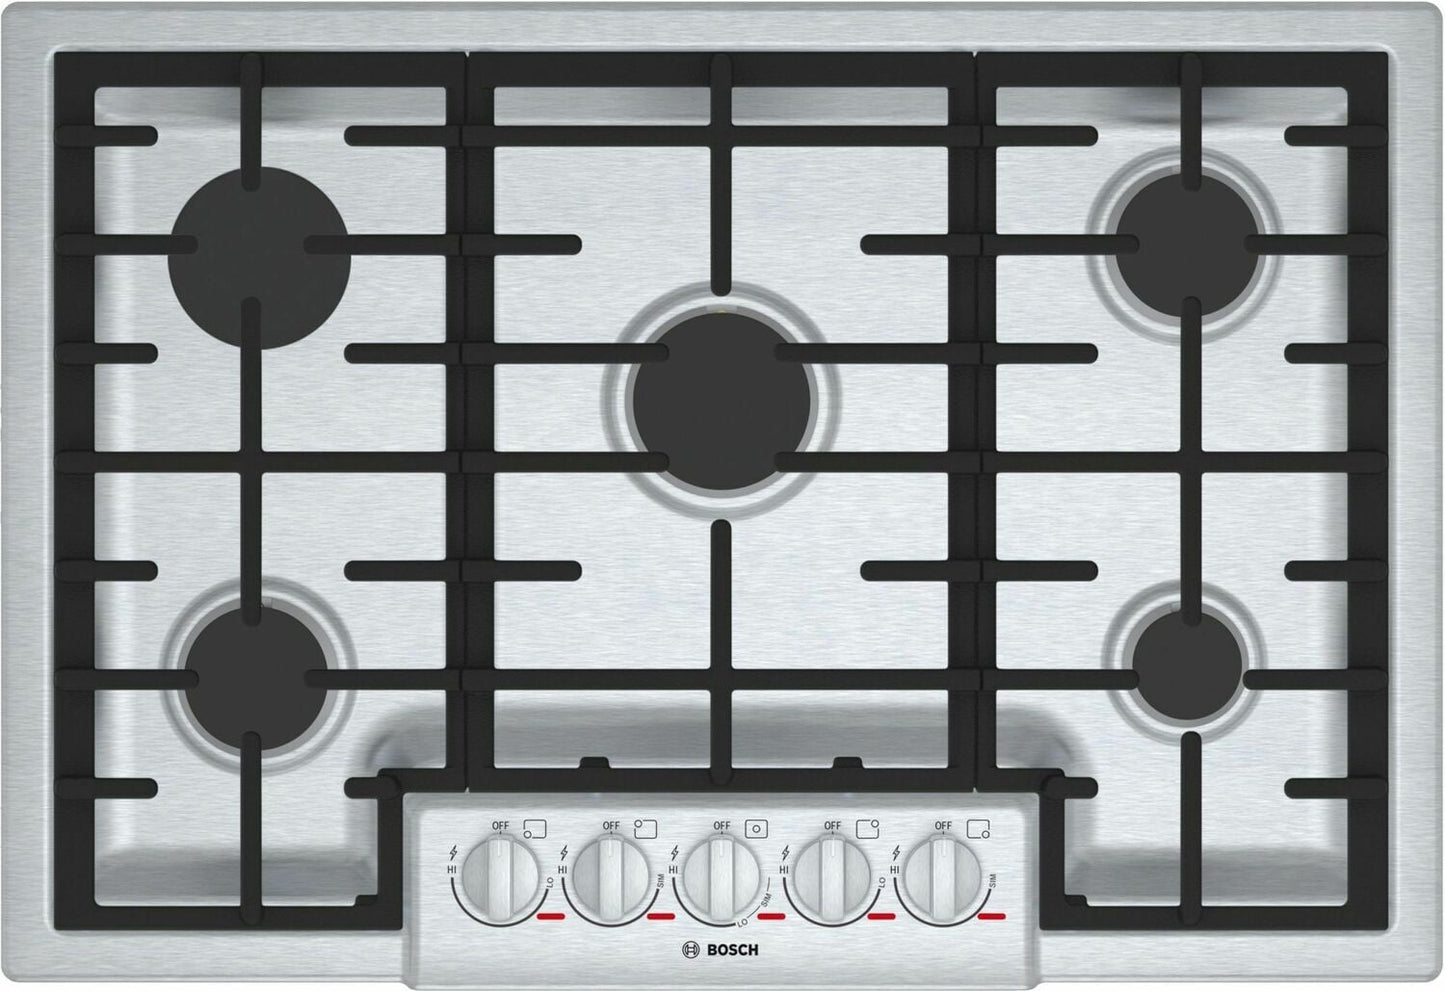 Bosch NGMP056UC Benchmark 30" Gas Cooktop, 5 Burners, Stainless Steel